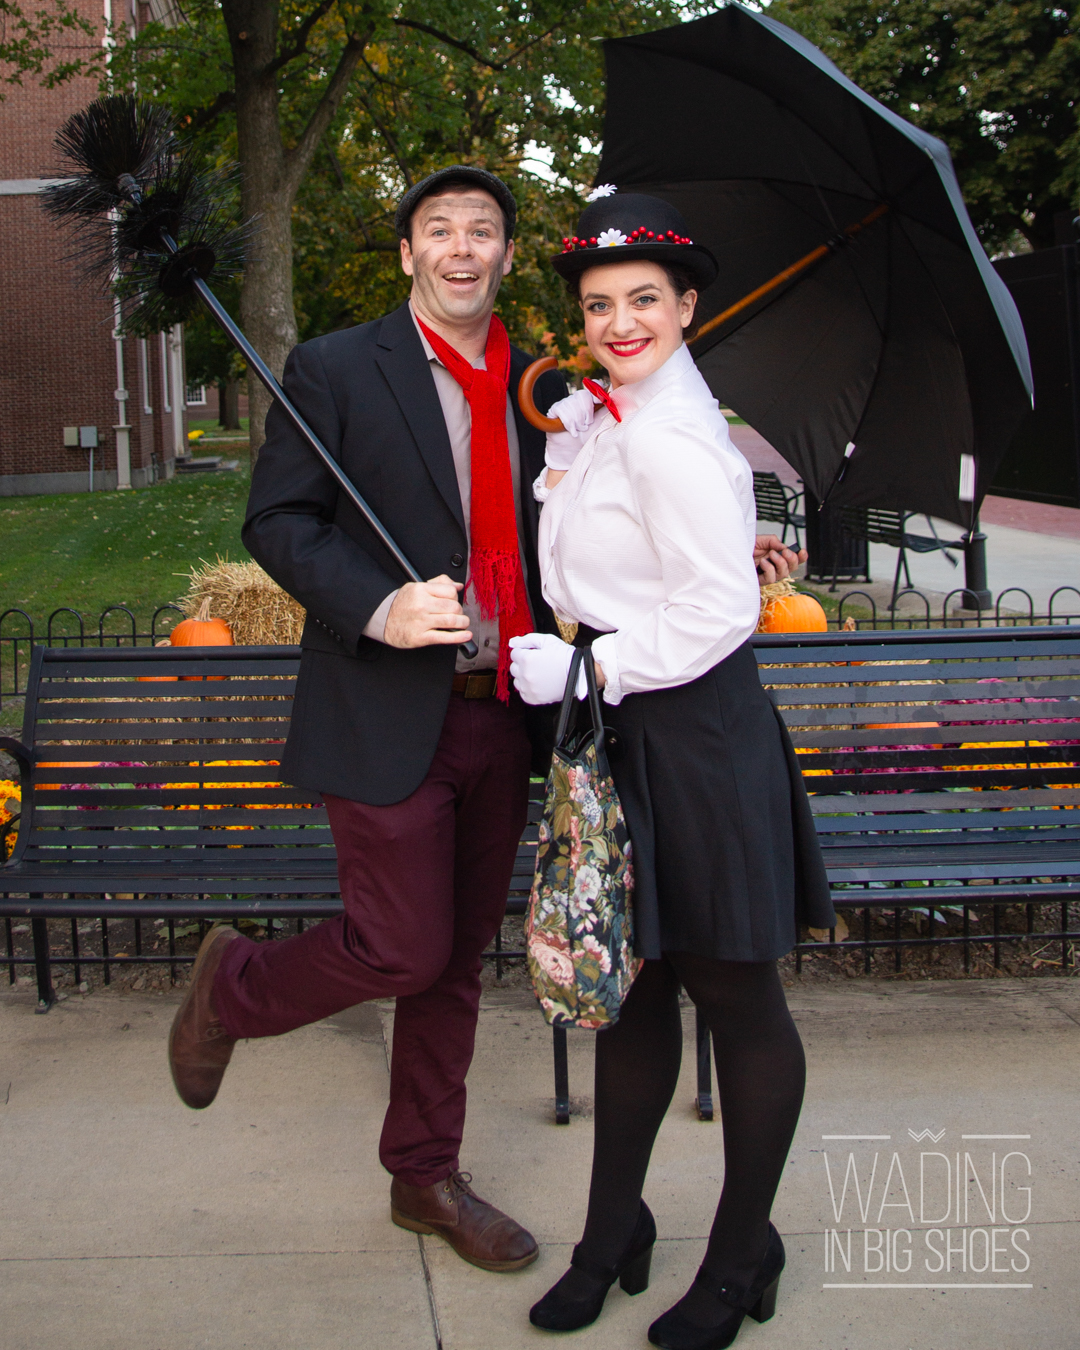 Wading in Big Shoes - Hallowe'en in Greenfield Village, 2020 Edition: A Reimagined Celebration